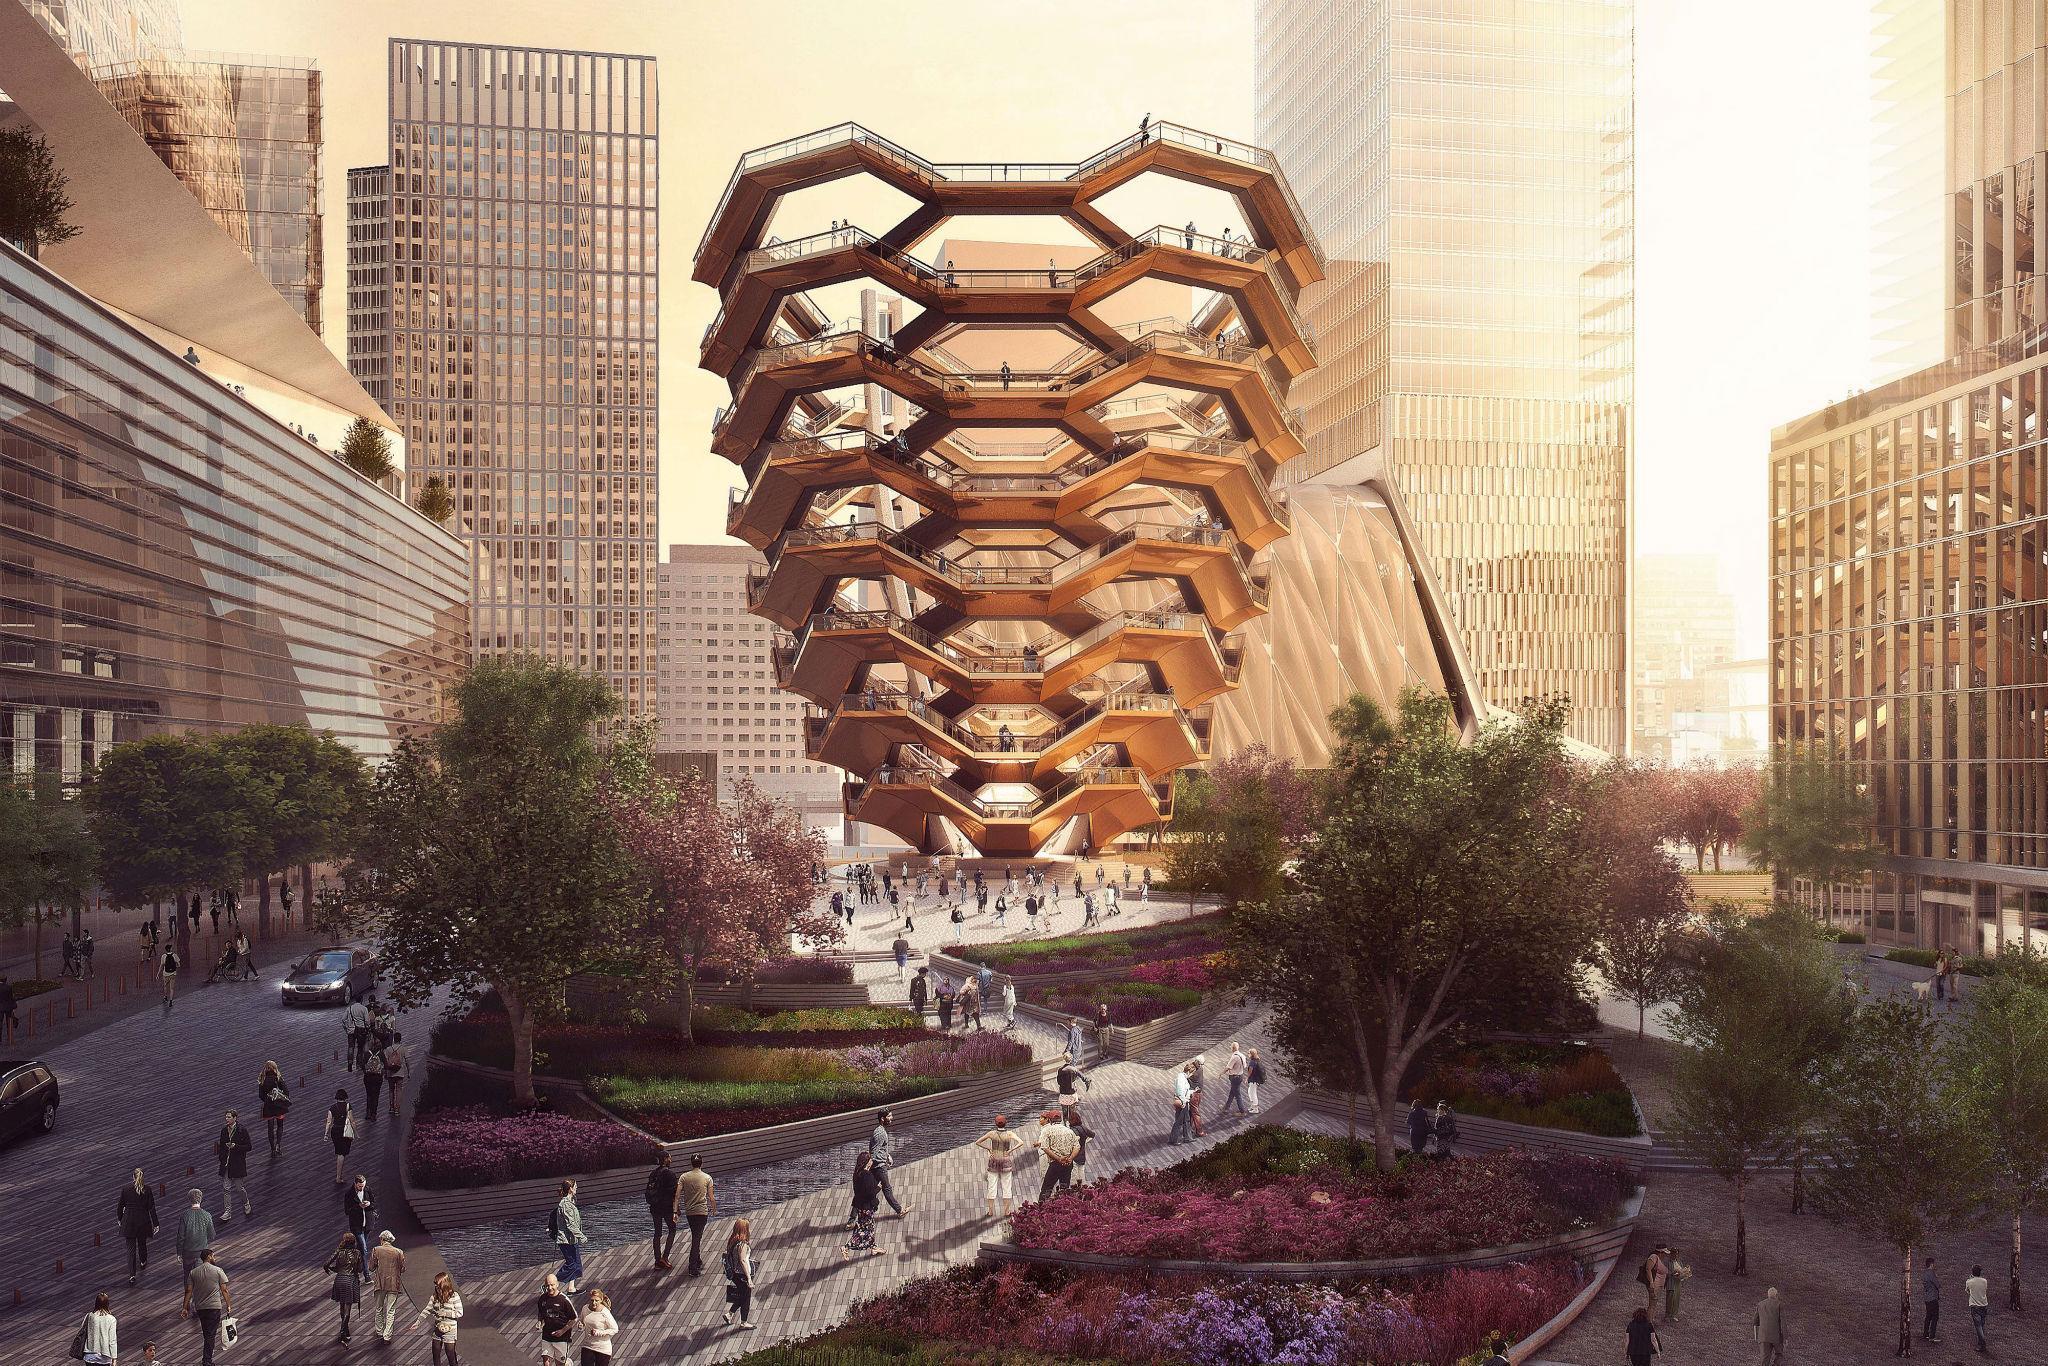 The structure, named 'Vessel', will contain more than 150 staircases and almost 2,500 individual steps